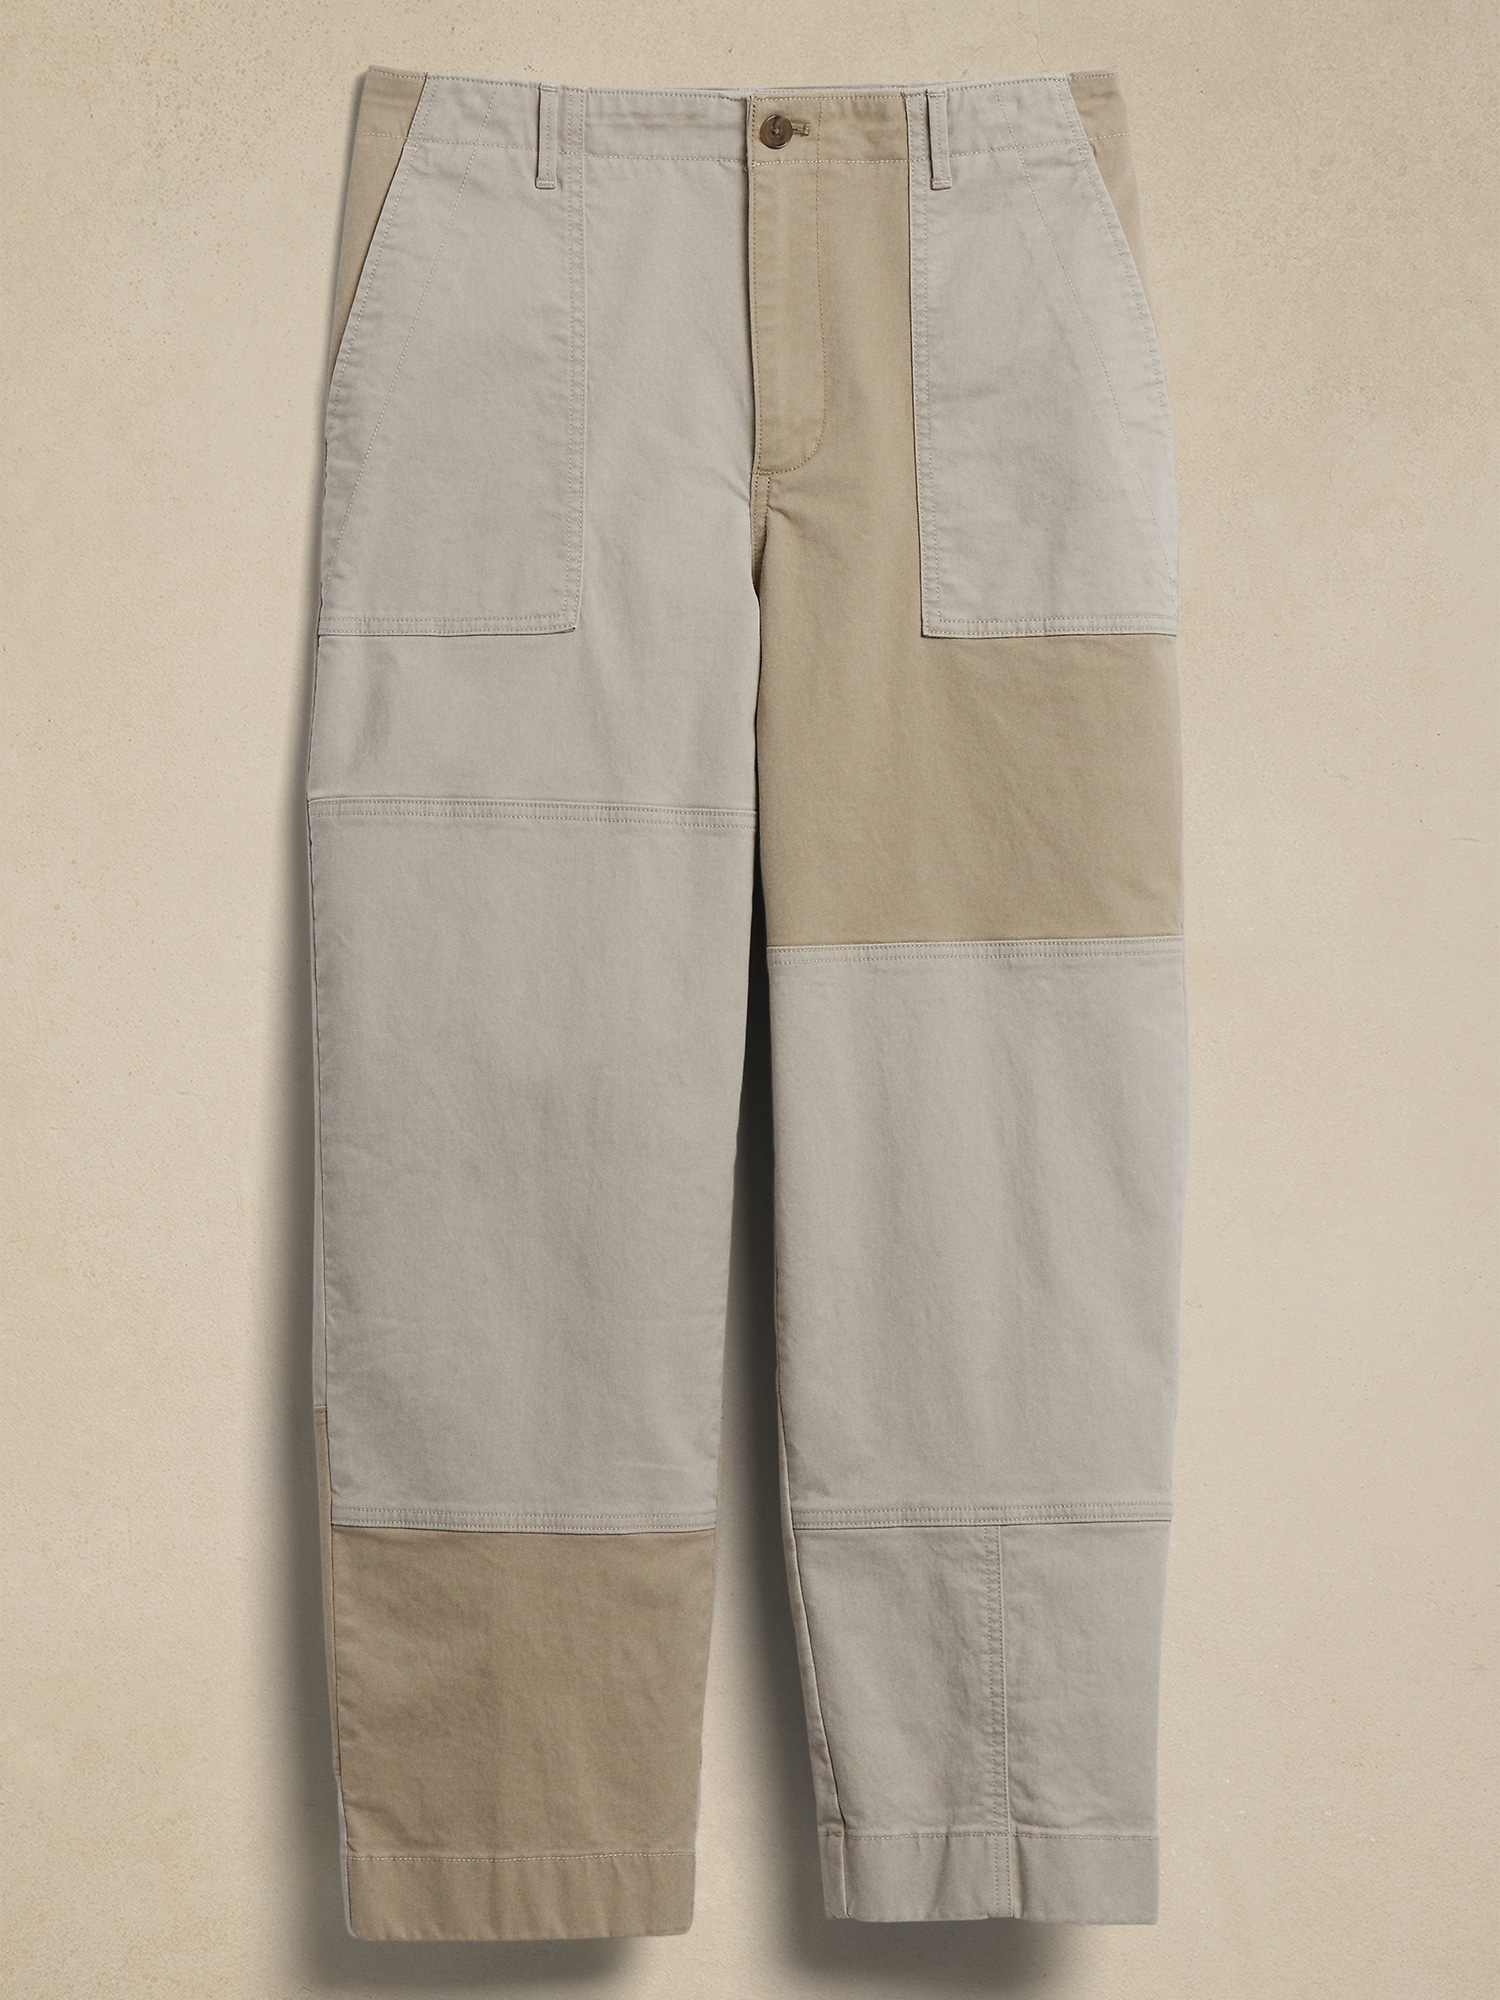 Authentic Patchwork Chino